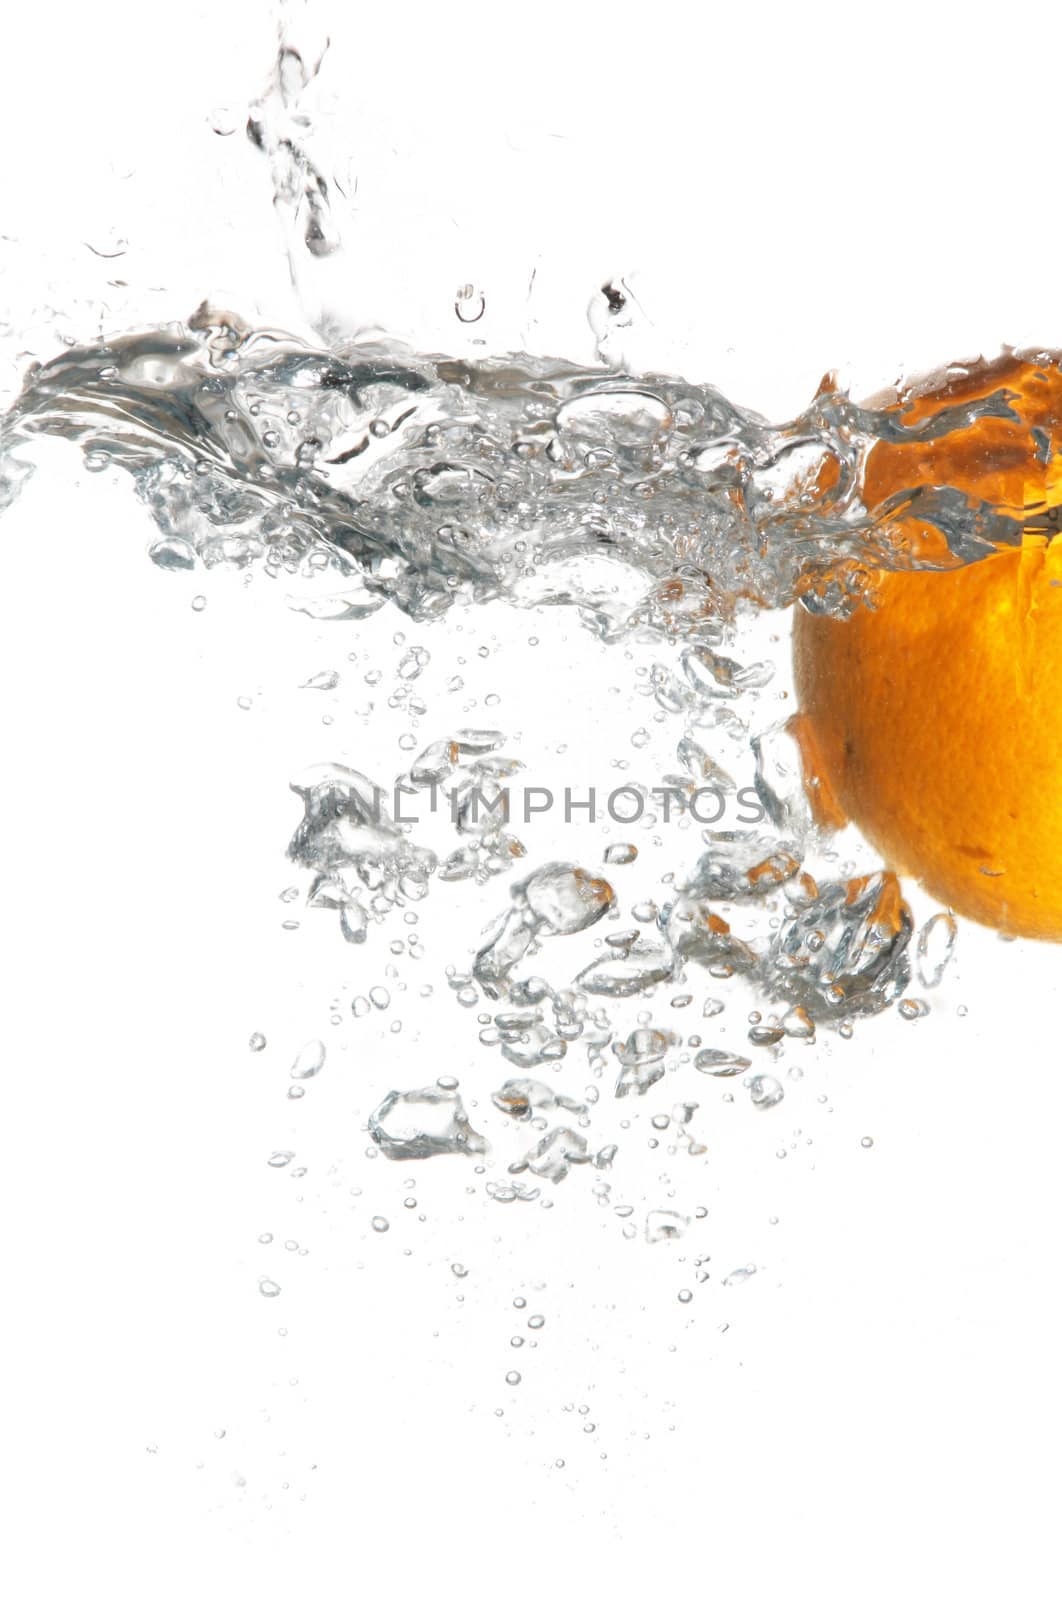 An image of orange in water